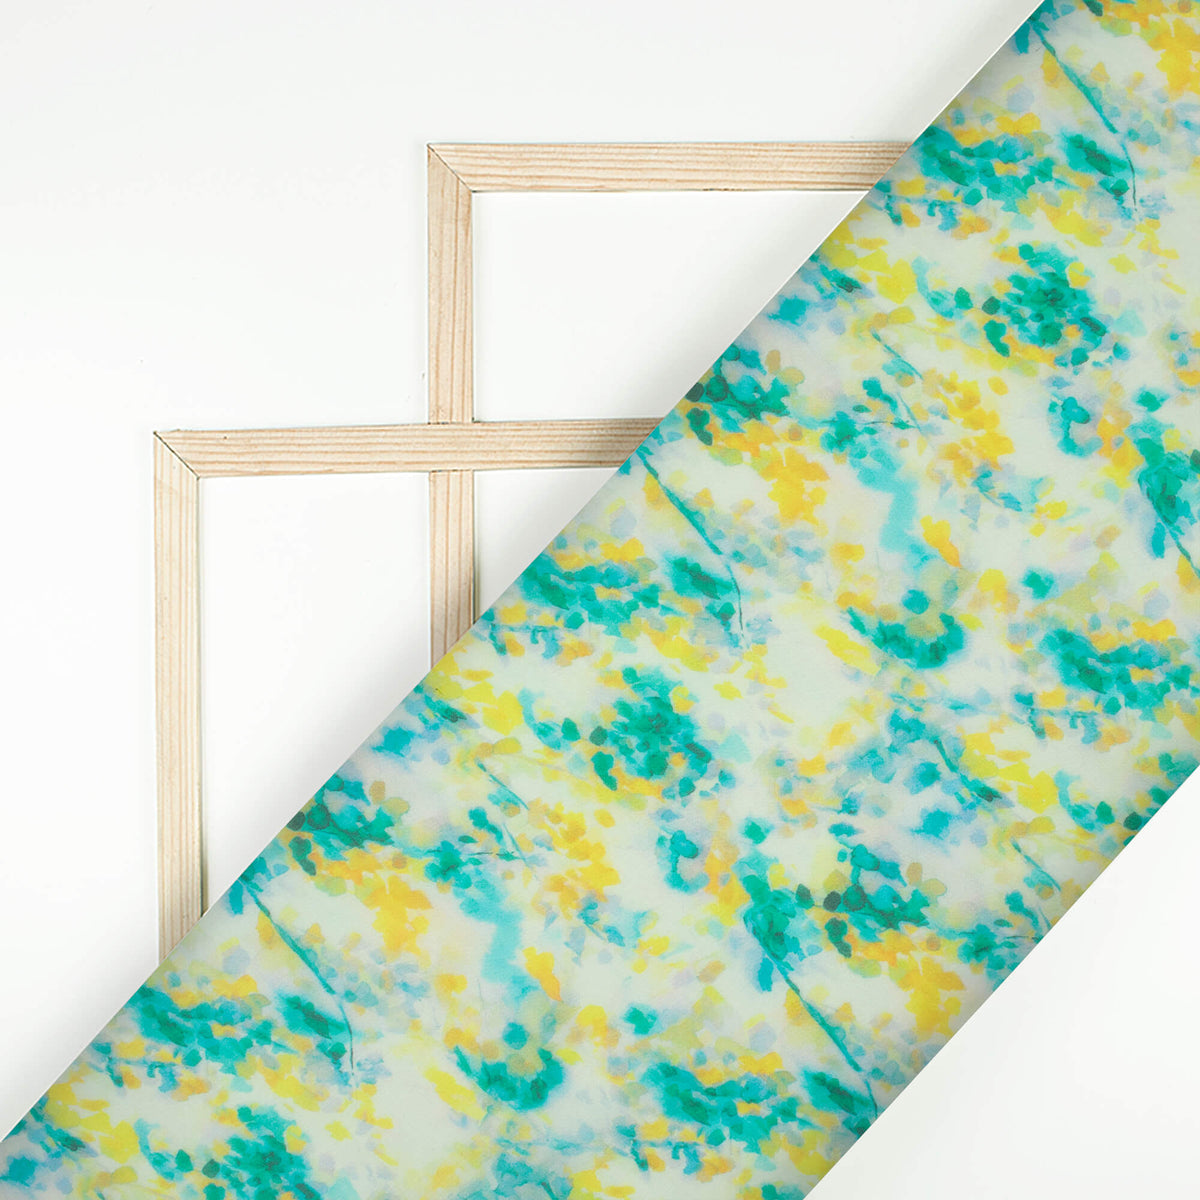 Teal Green And Lemon Yellow Floral Pattern Digital Print Pure Georgette Fabric